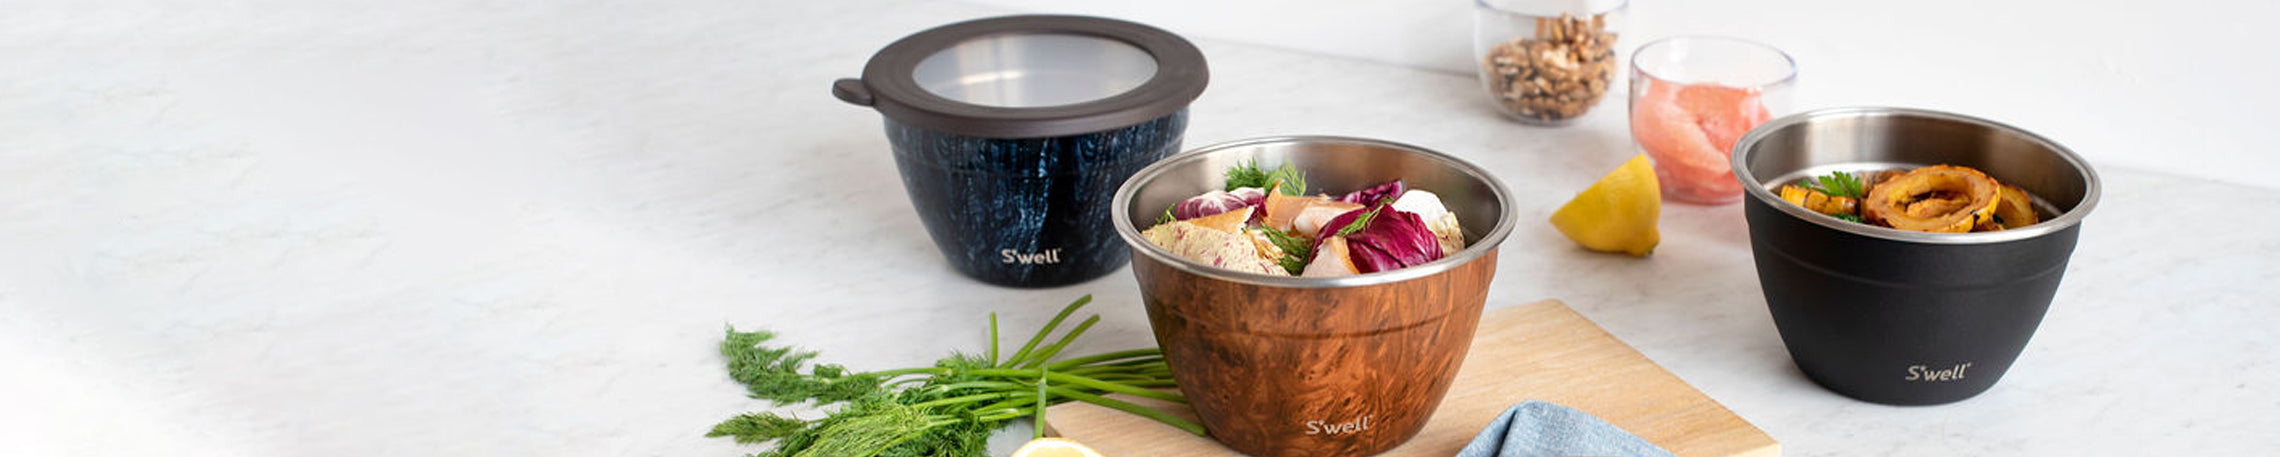 Swell: Have You Met Our New Salad Bowl Kit?